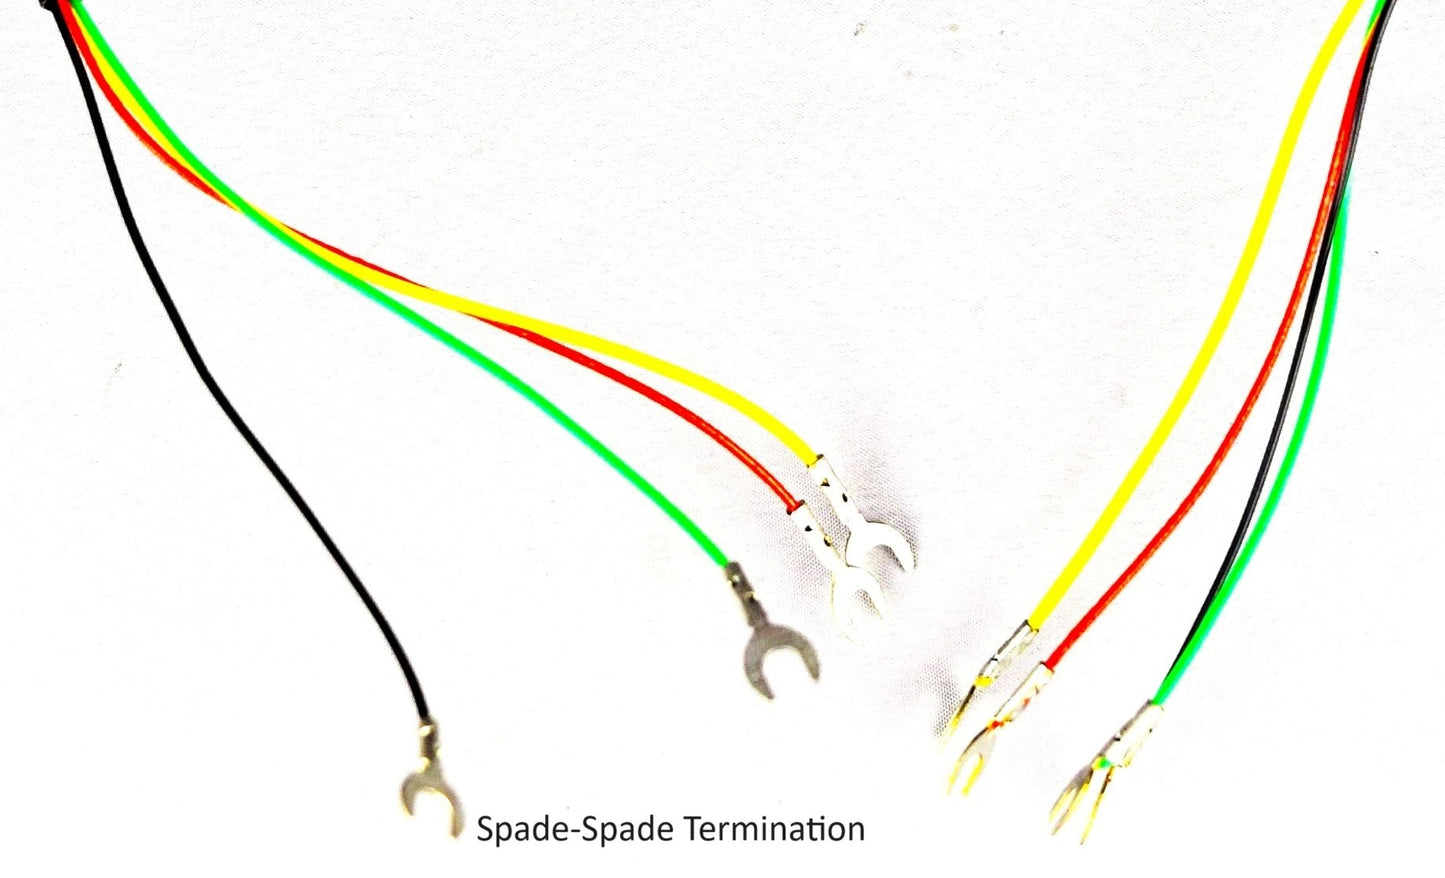 Cord -  Line - 4 Conductor - Flat - Choose Length and Termination